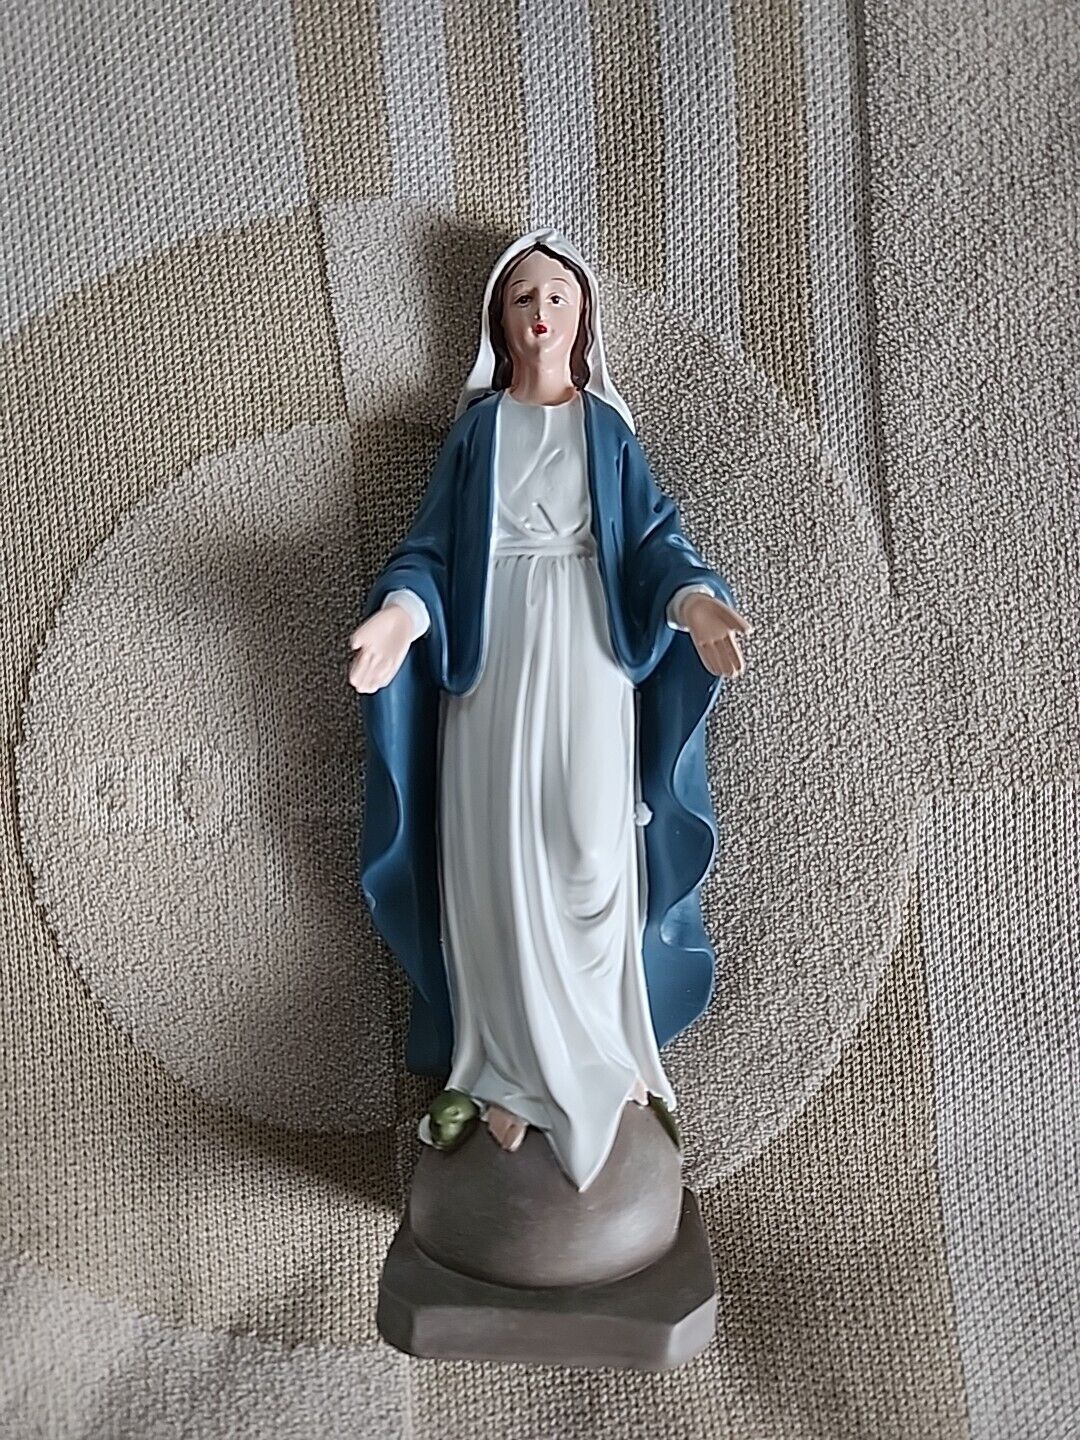 Virgin Mary Statue- Blessed Mother Statues, Religious Gifts for Women, Suitab...